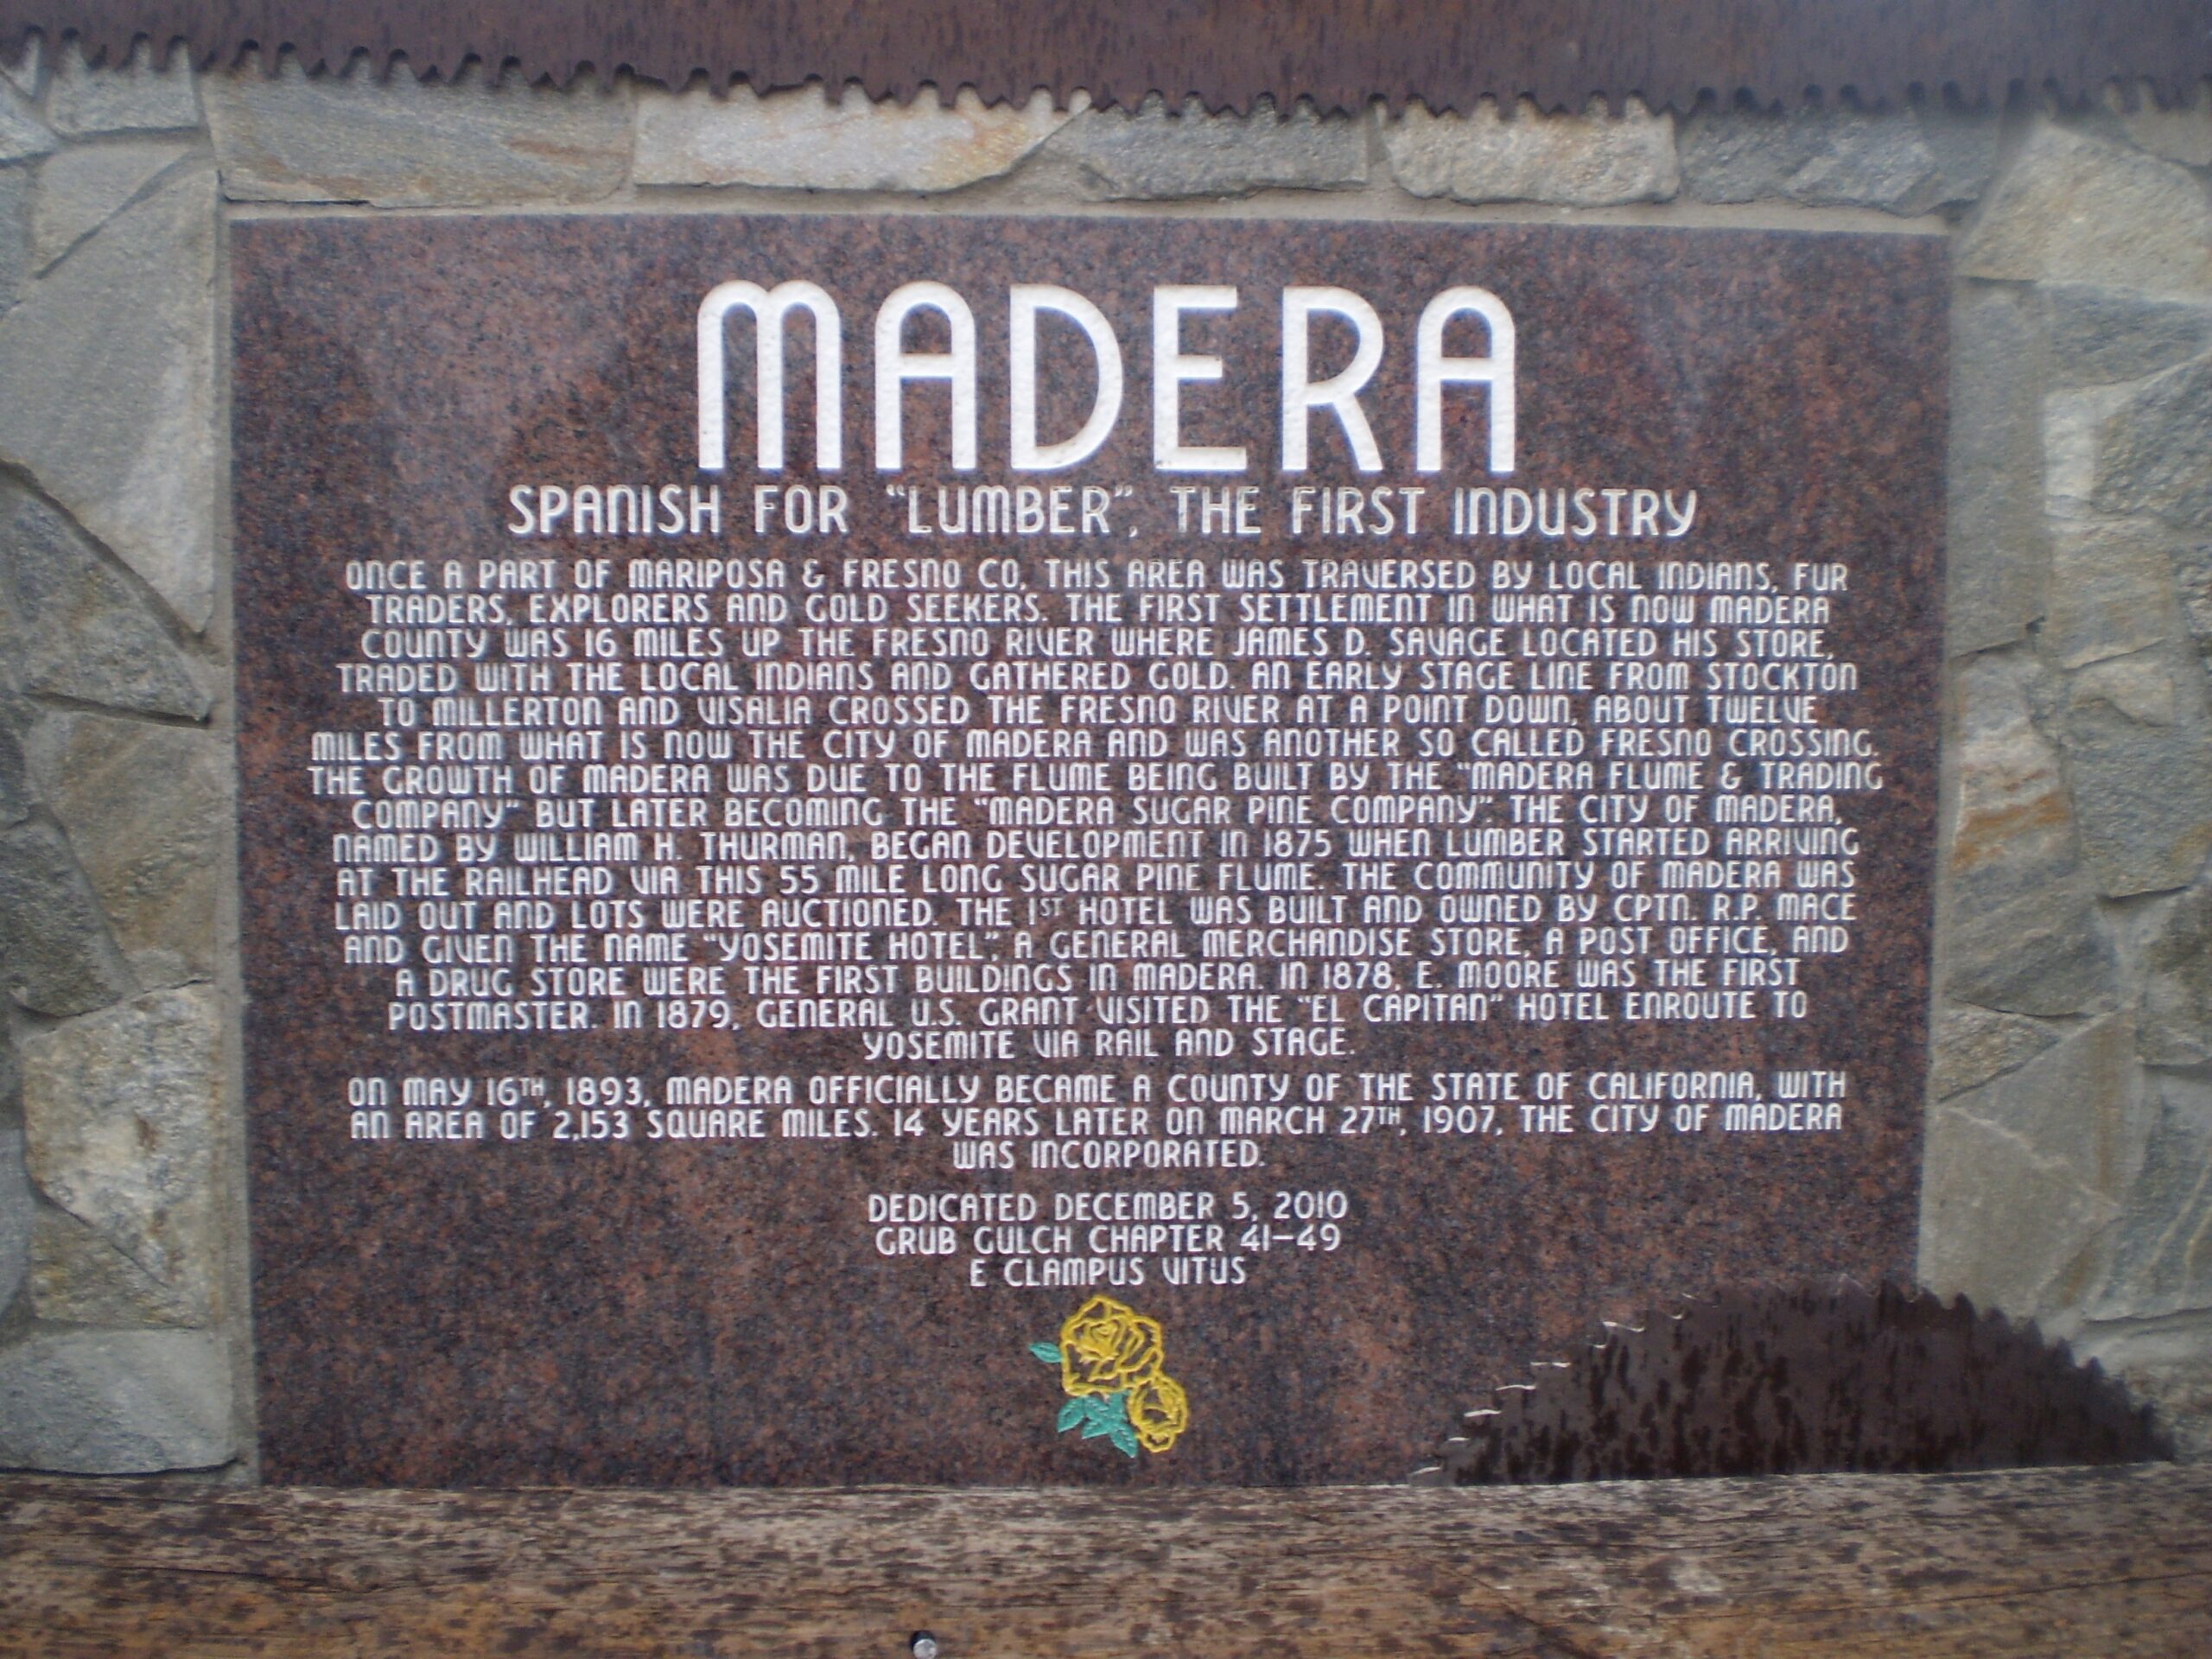 Photographer: Lester J Letson Taken: December 5, 2010 Caption: Madera Marker Additional Description: Dedicated to both the County of Madera and the City of Madera. Submitted: February 5, 2012, by Lester J Letson of Fresno, California.